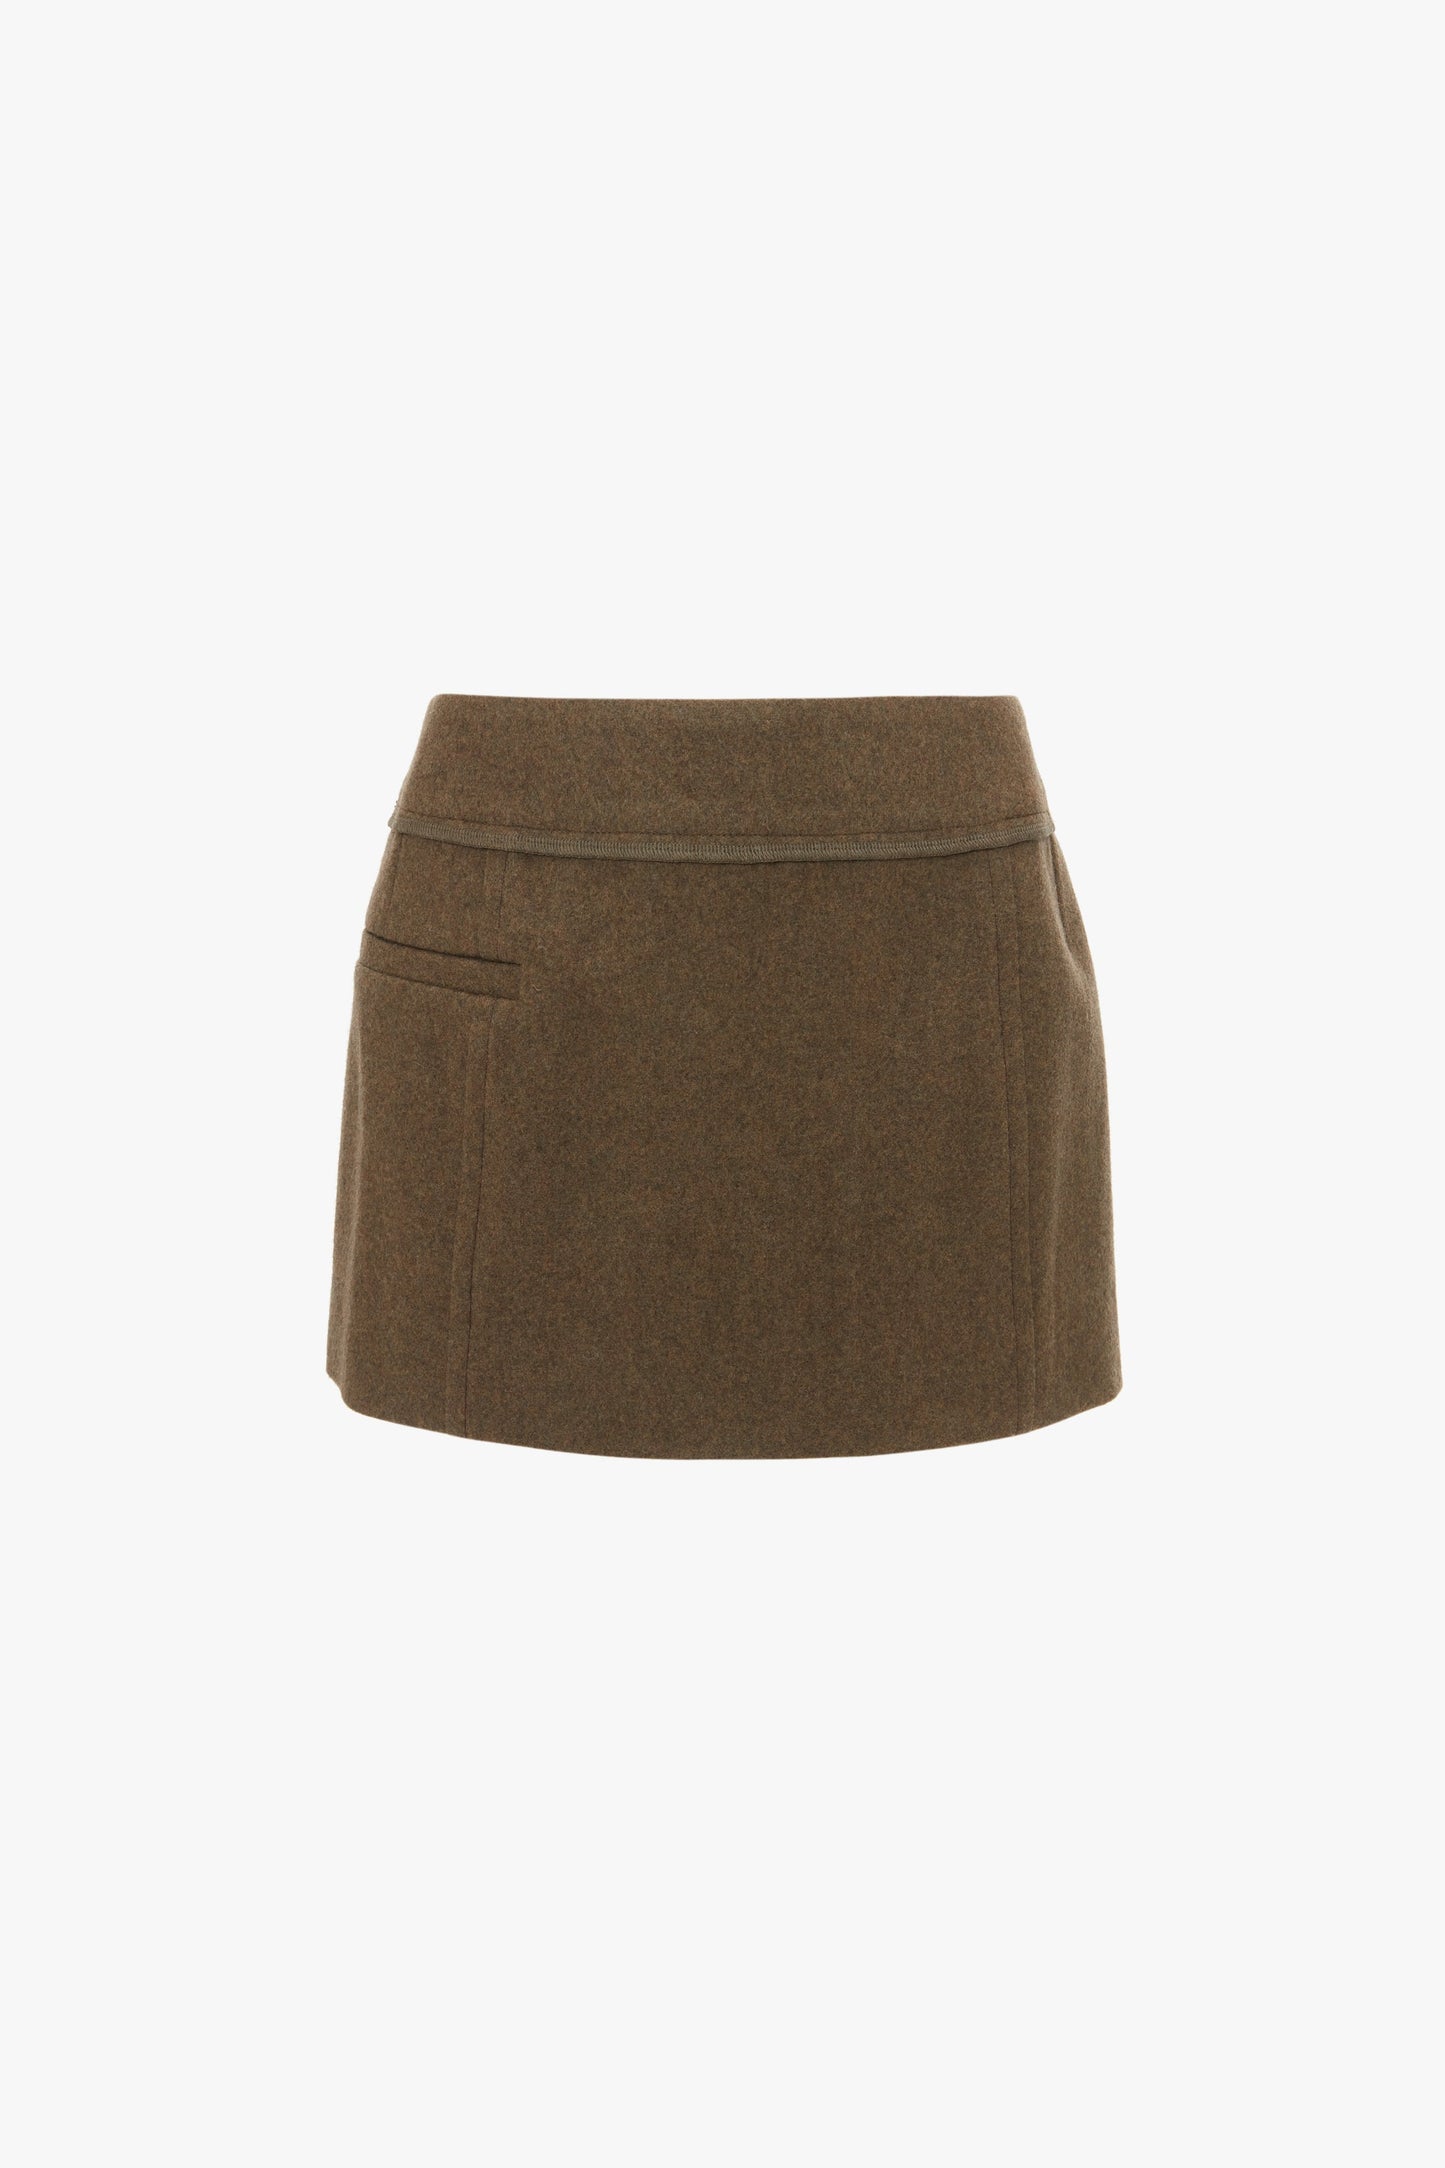 A Victoria Beckham Tailored Mini Skirt In Khaki, in luxurious brown merino wool, featuring a single side pocket and a seam near the waistband, displayed against a plain white background.